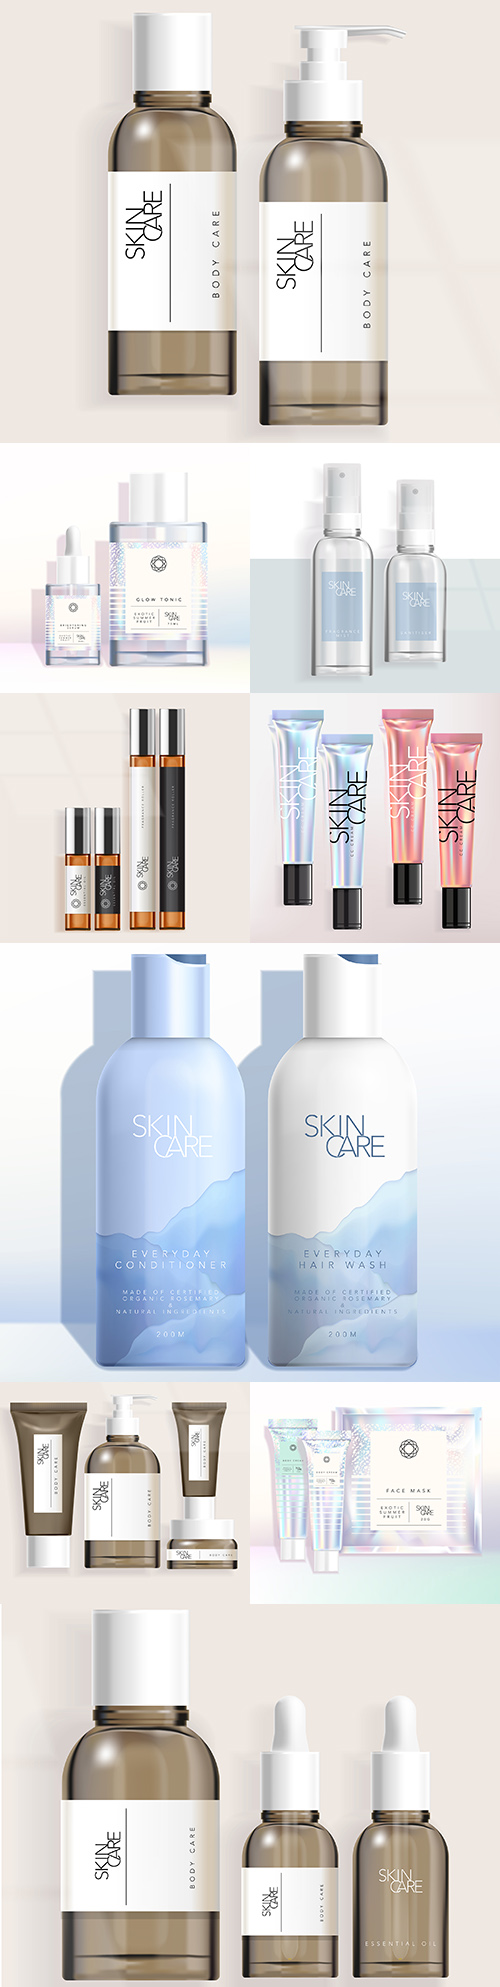 Skin care bottles and holographic rainbow packaging
